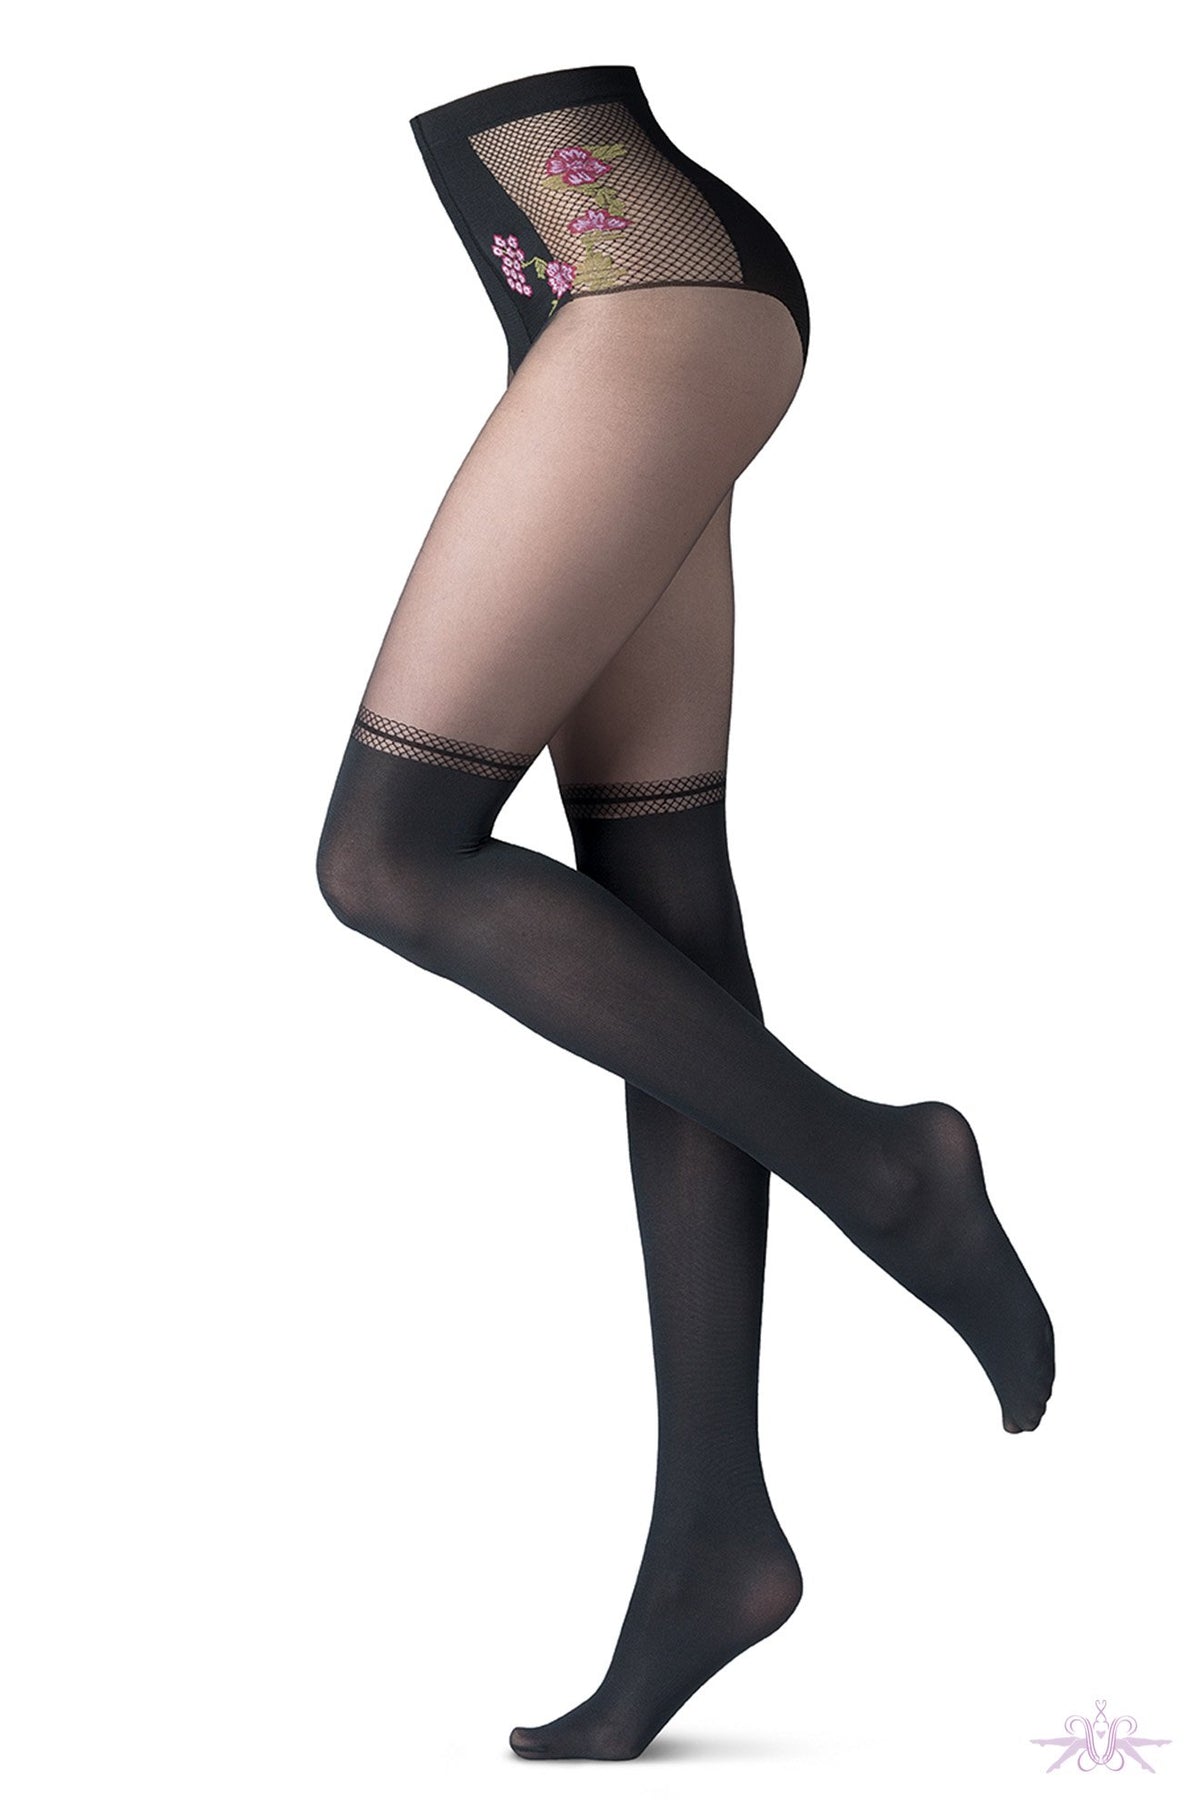 Oroblu Dressy Tights at The Hosiery Box - The Tights Boutique